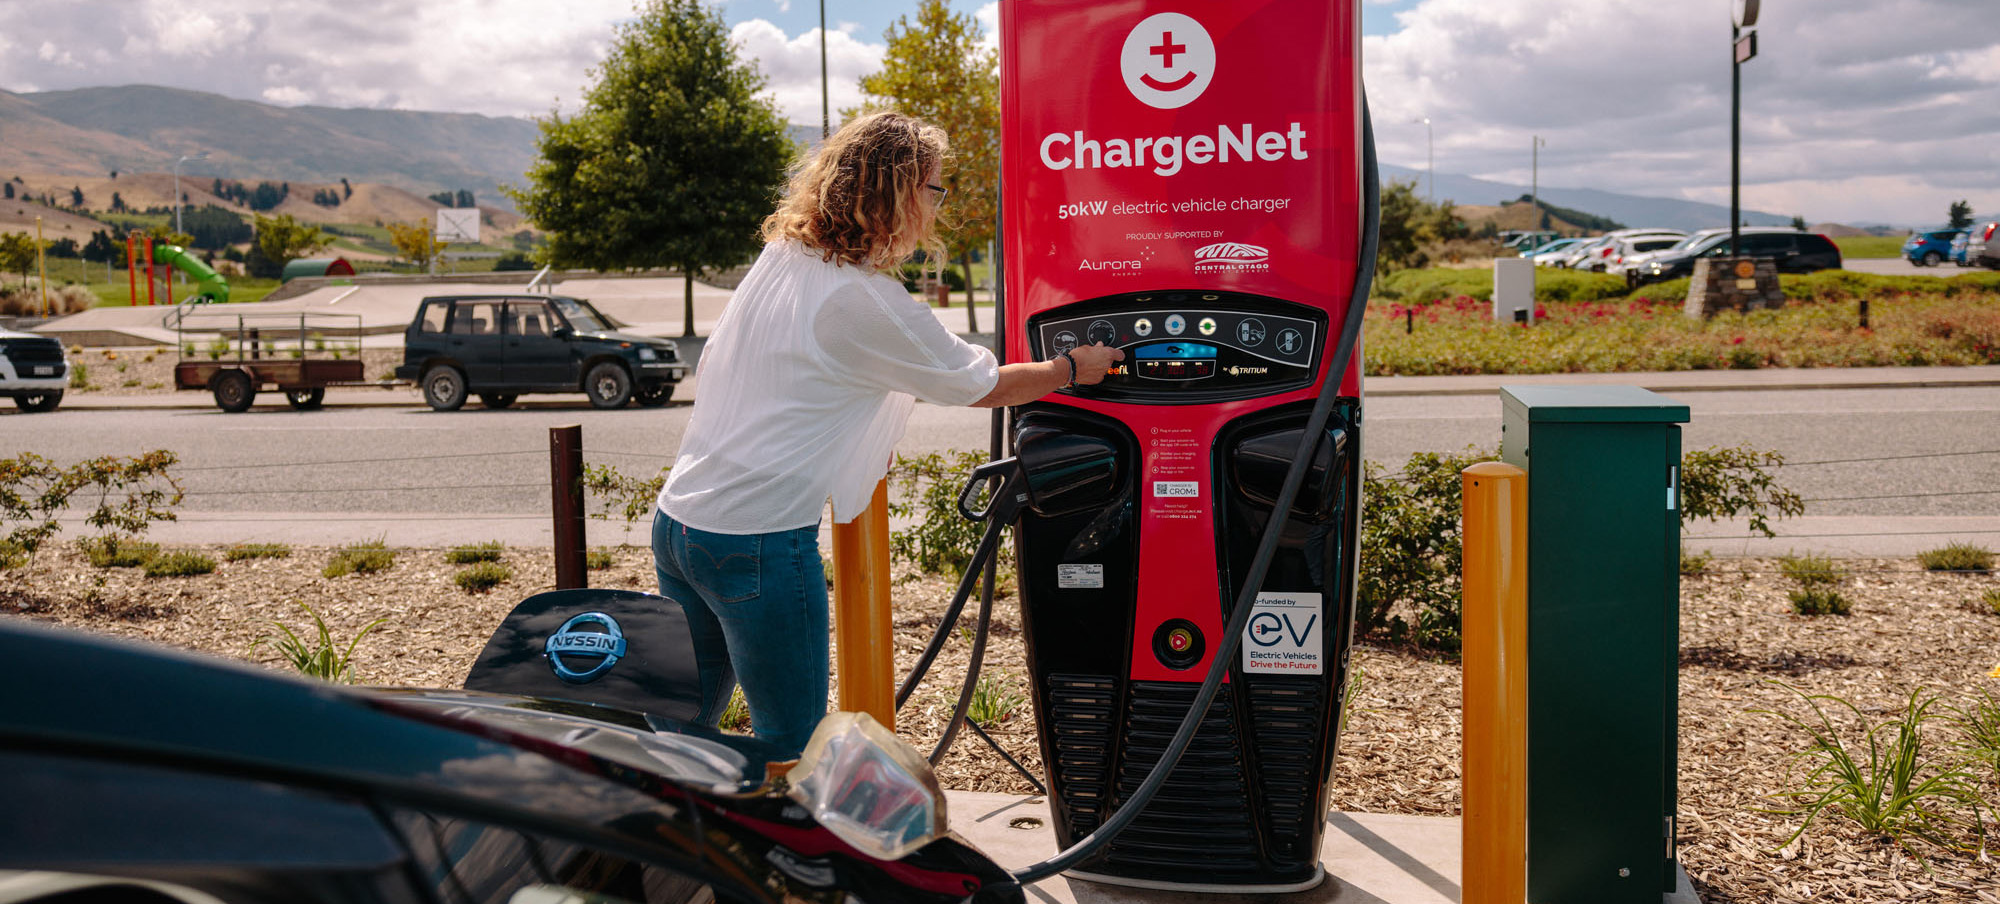 A comprehensive guide to public EV charging